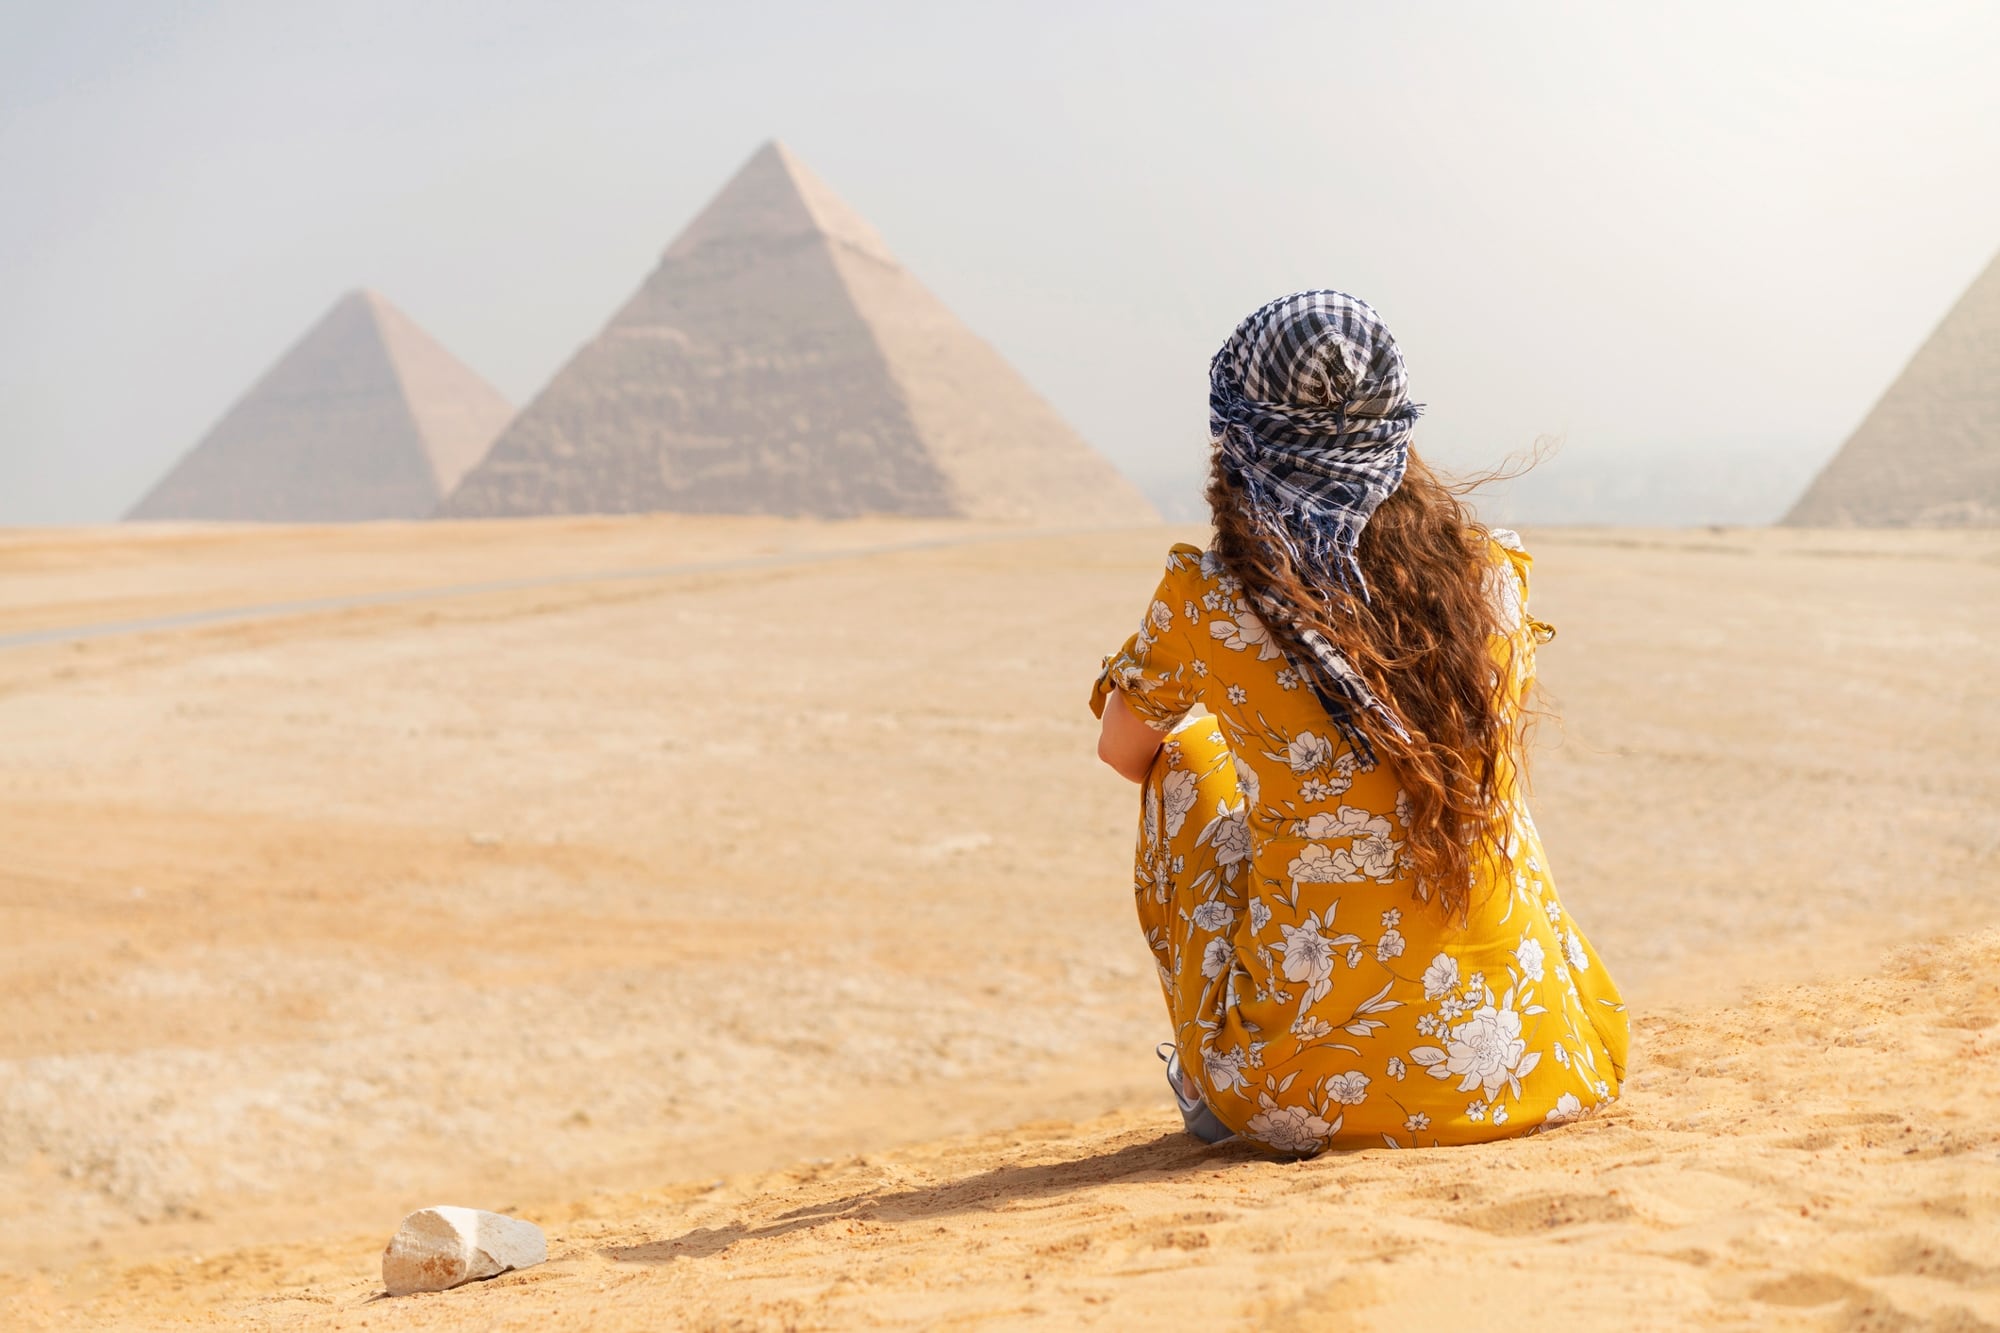 Woman looks at pyramids in the distance